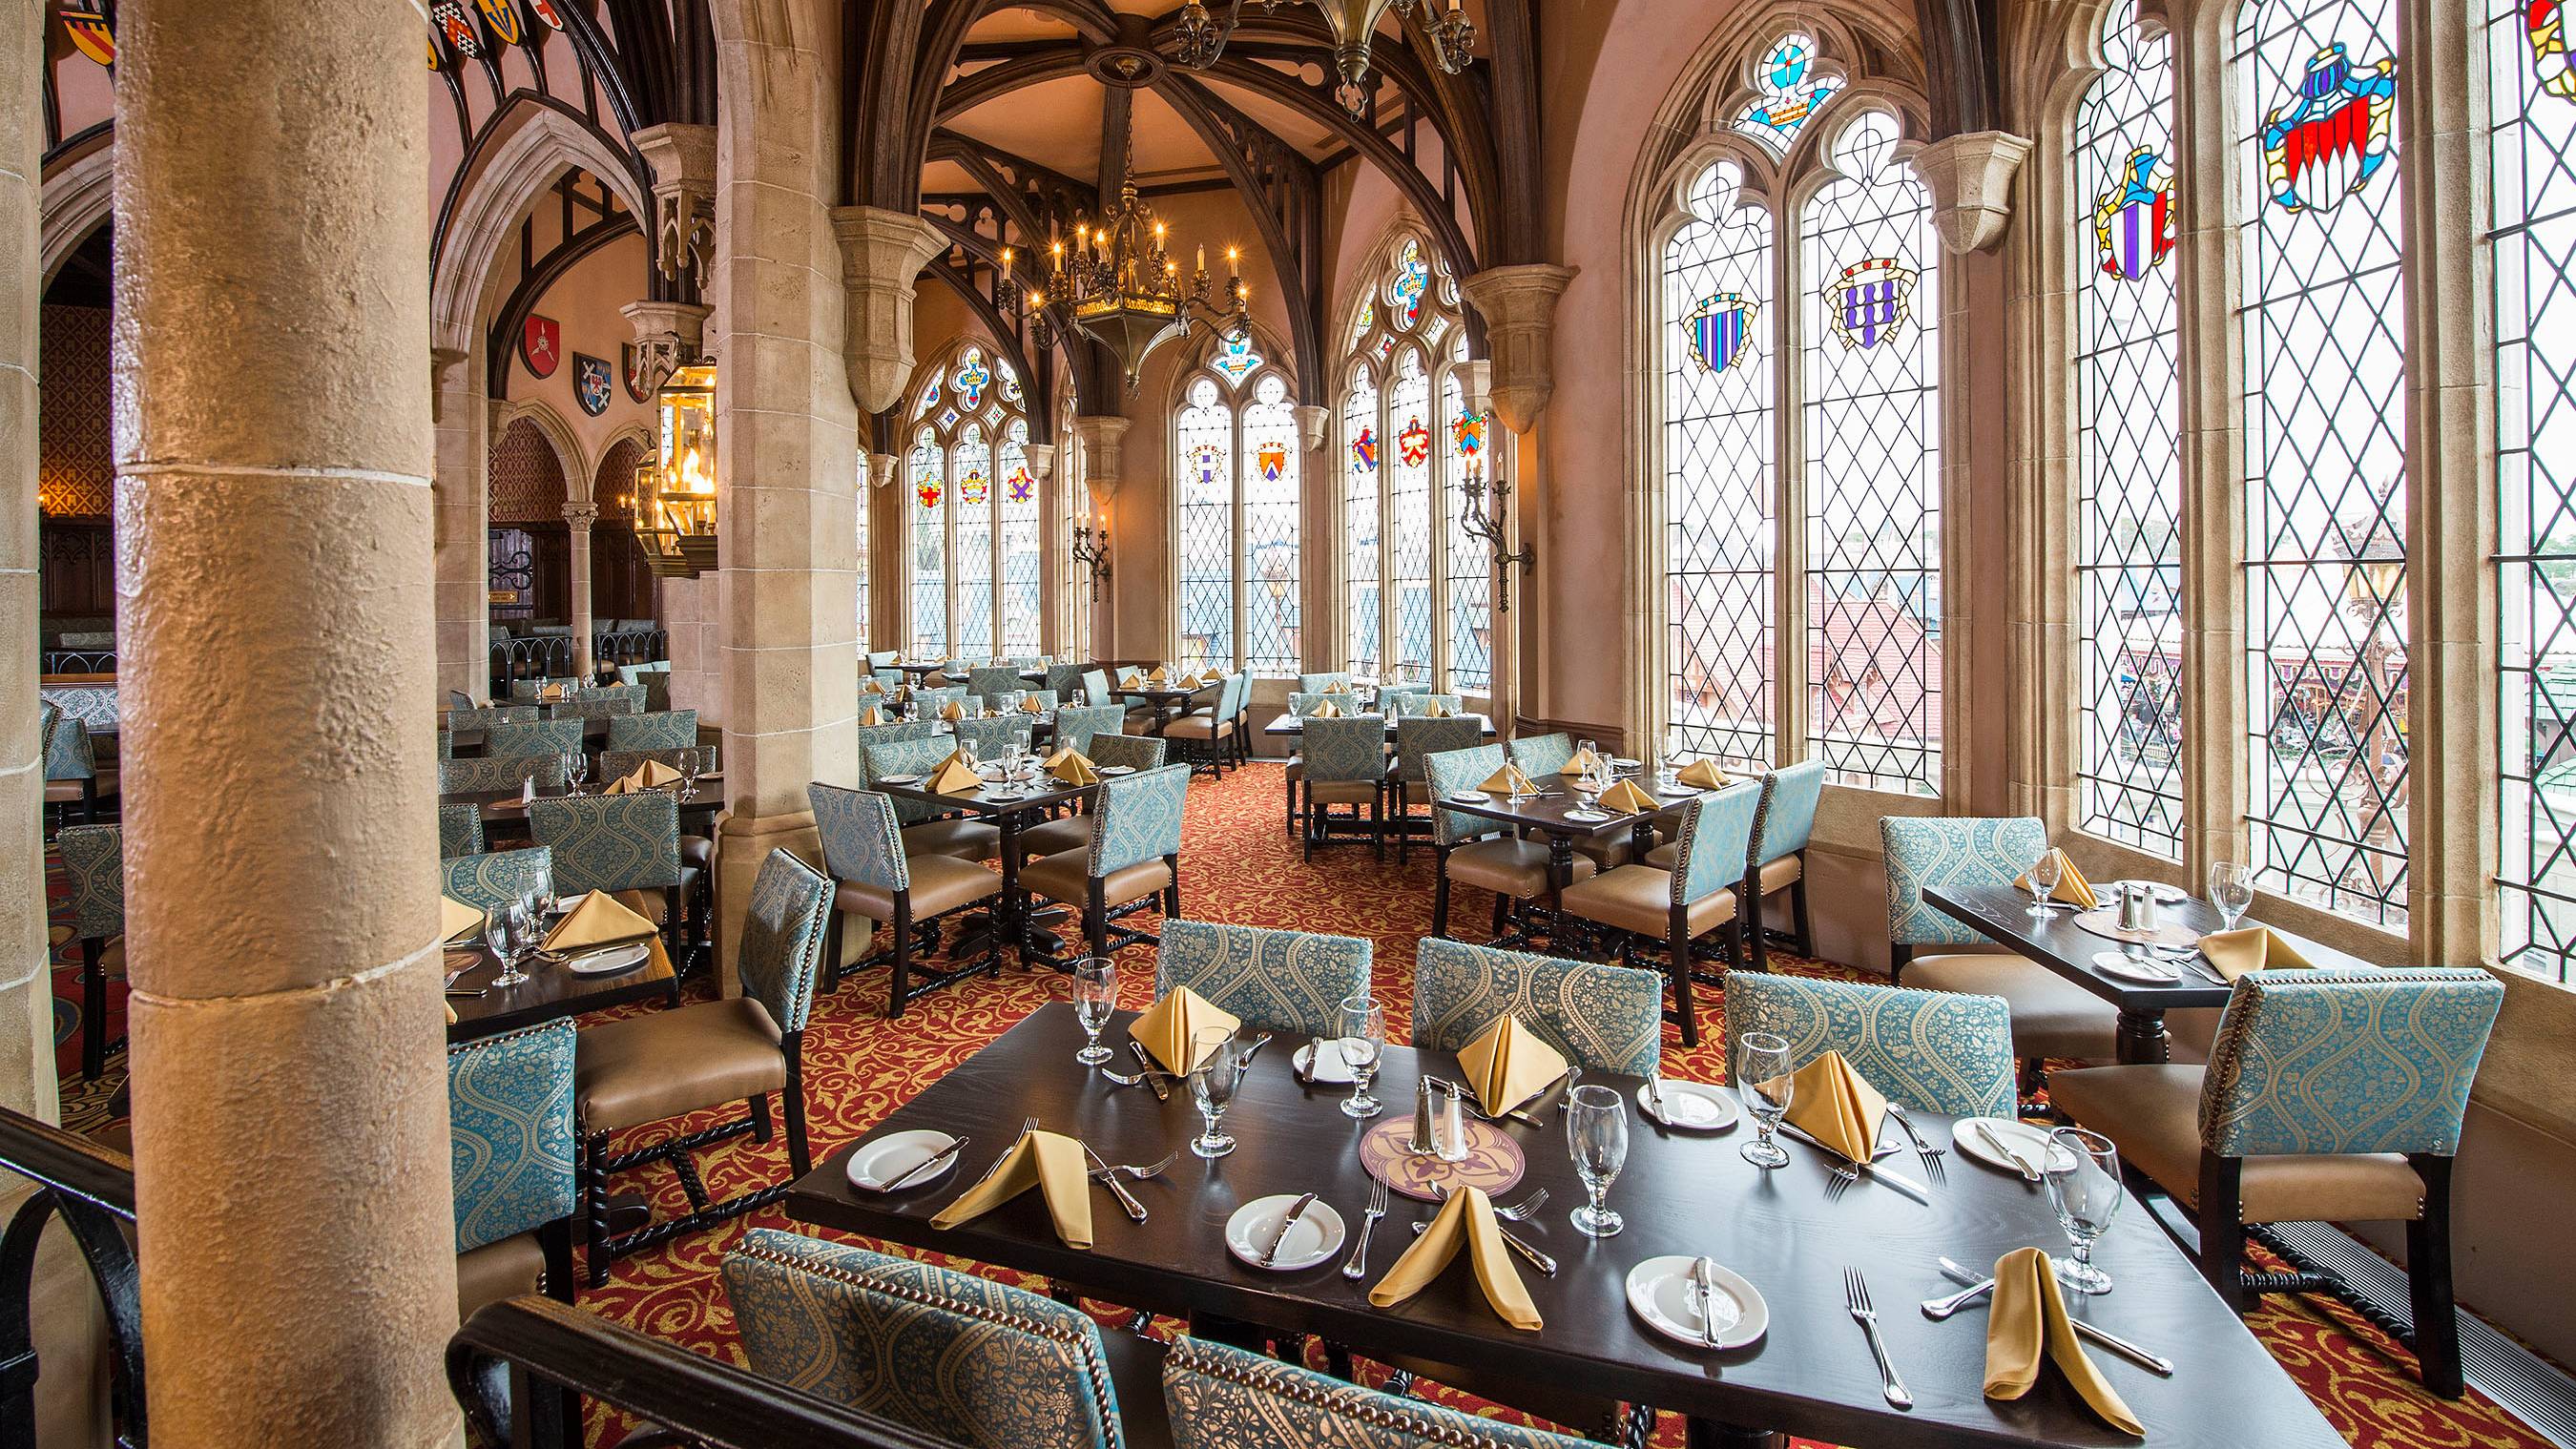 Reservations at high-demand restaurants like Cinderella's Royal Table will be easier to secure with the new alert feature.